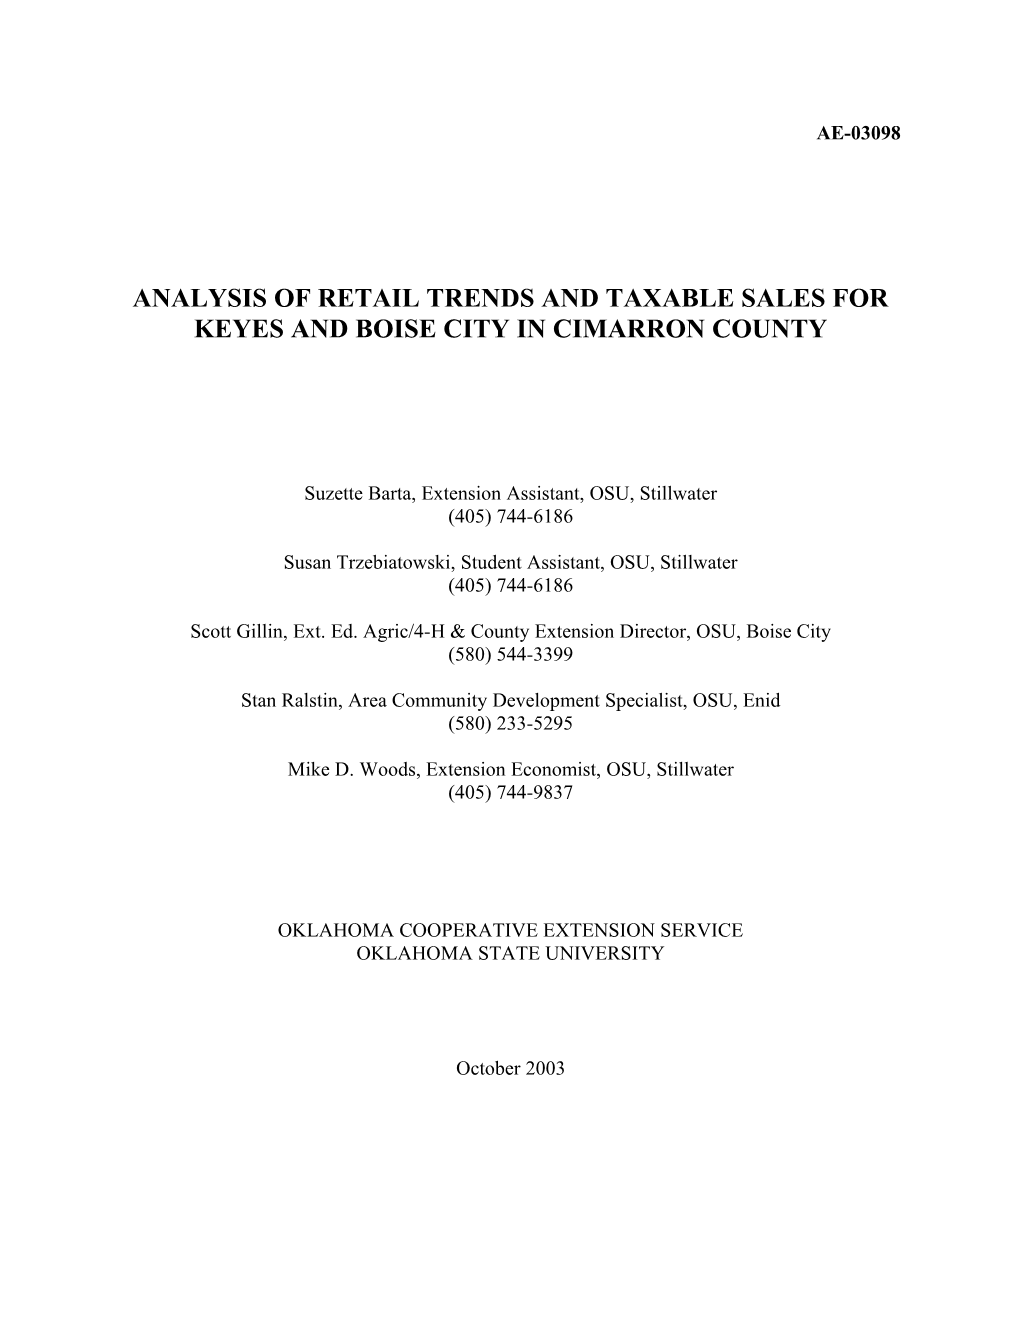 Analysis of Retail Trends and Taxable Sales for Keyes and Boise City in Cimarron County